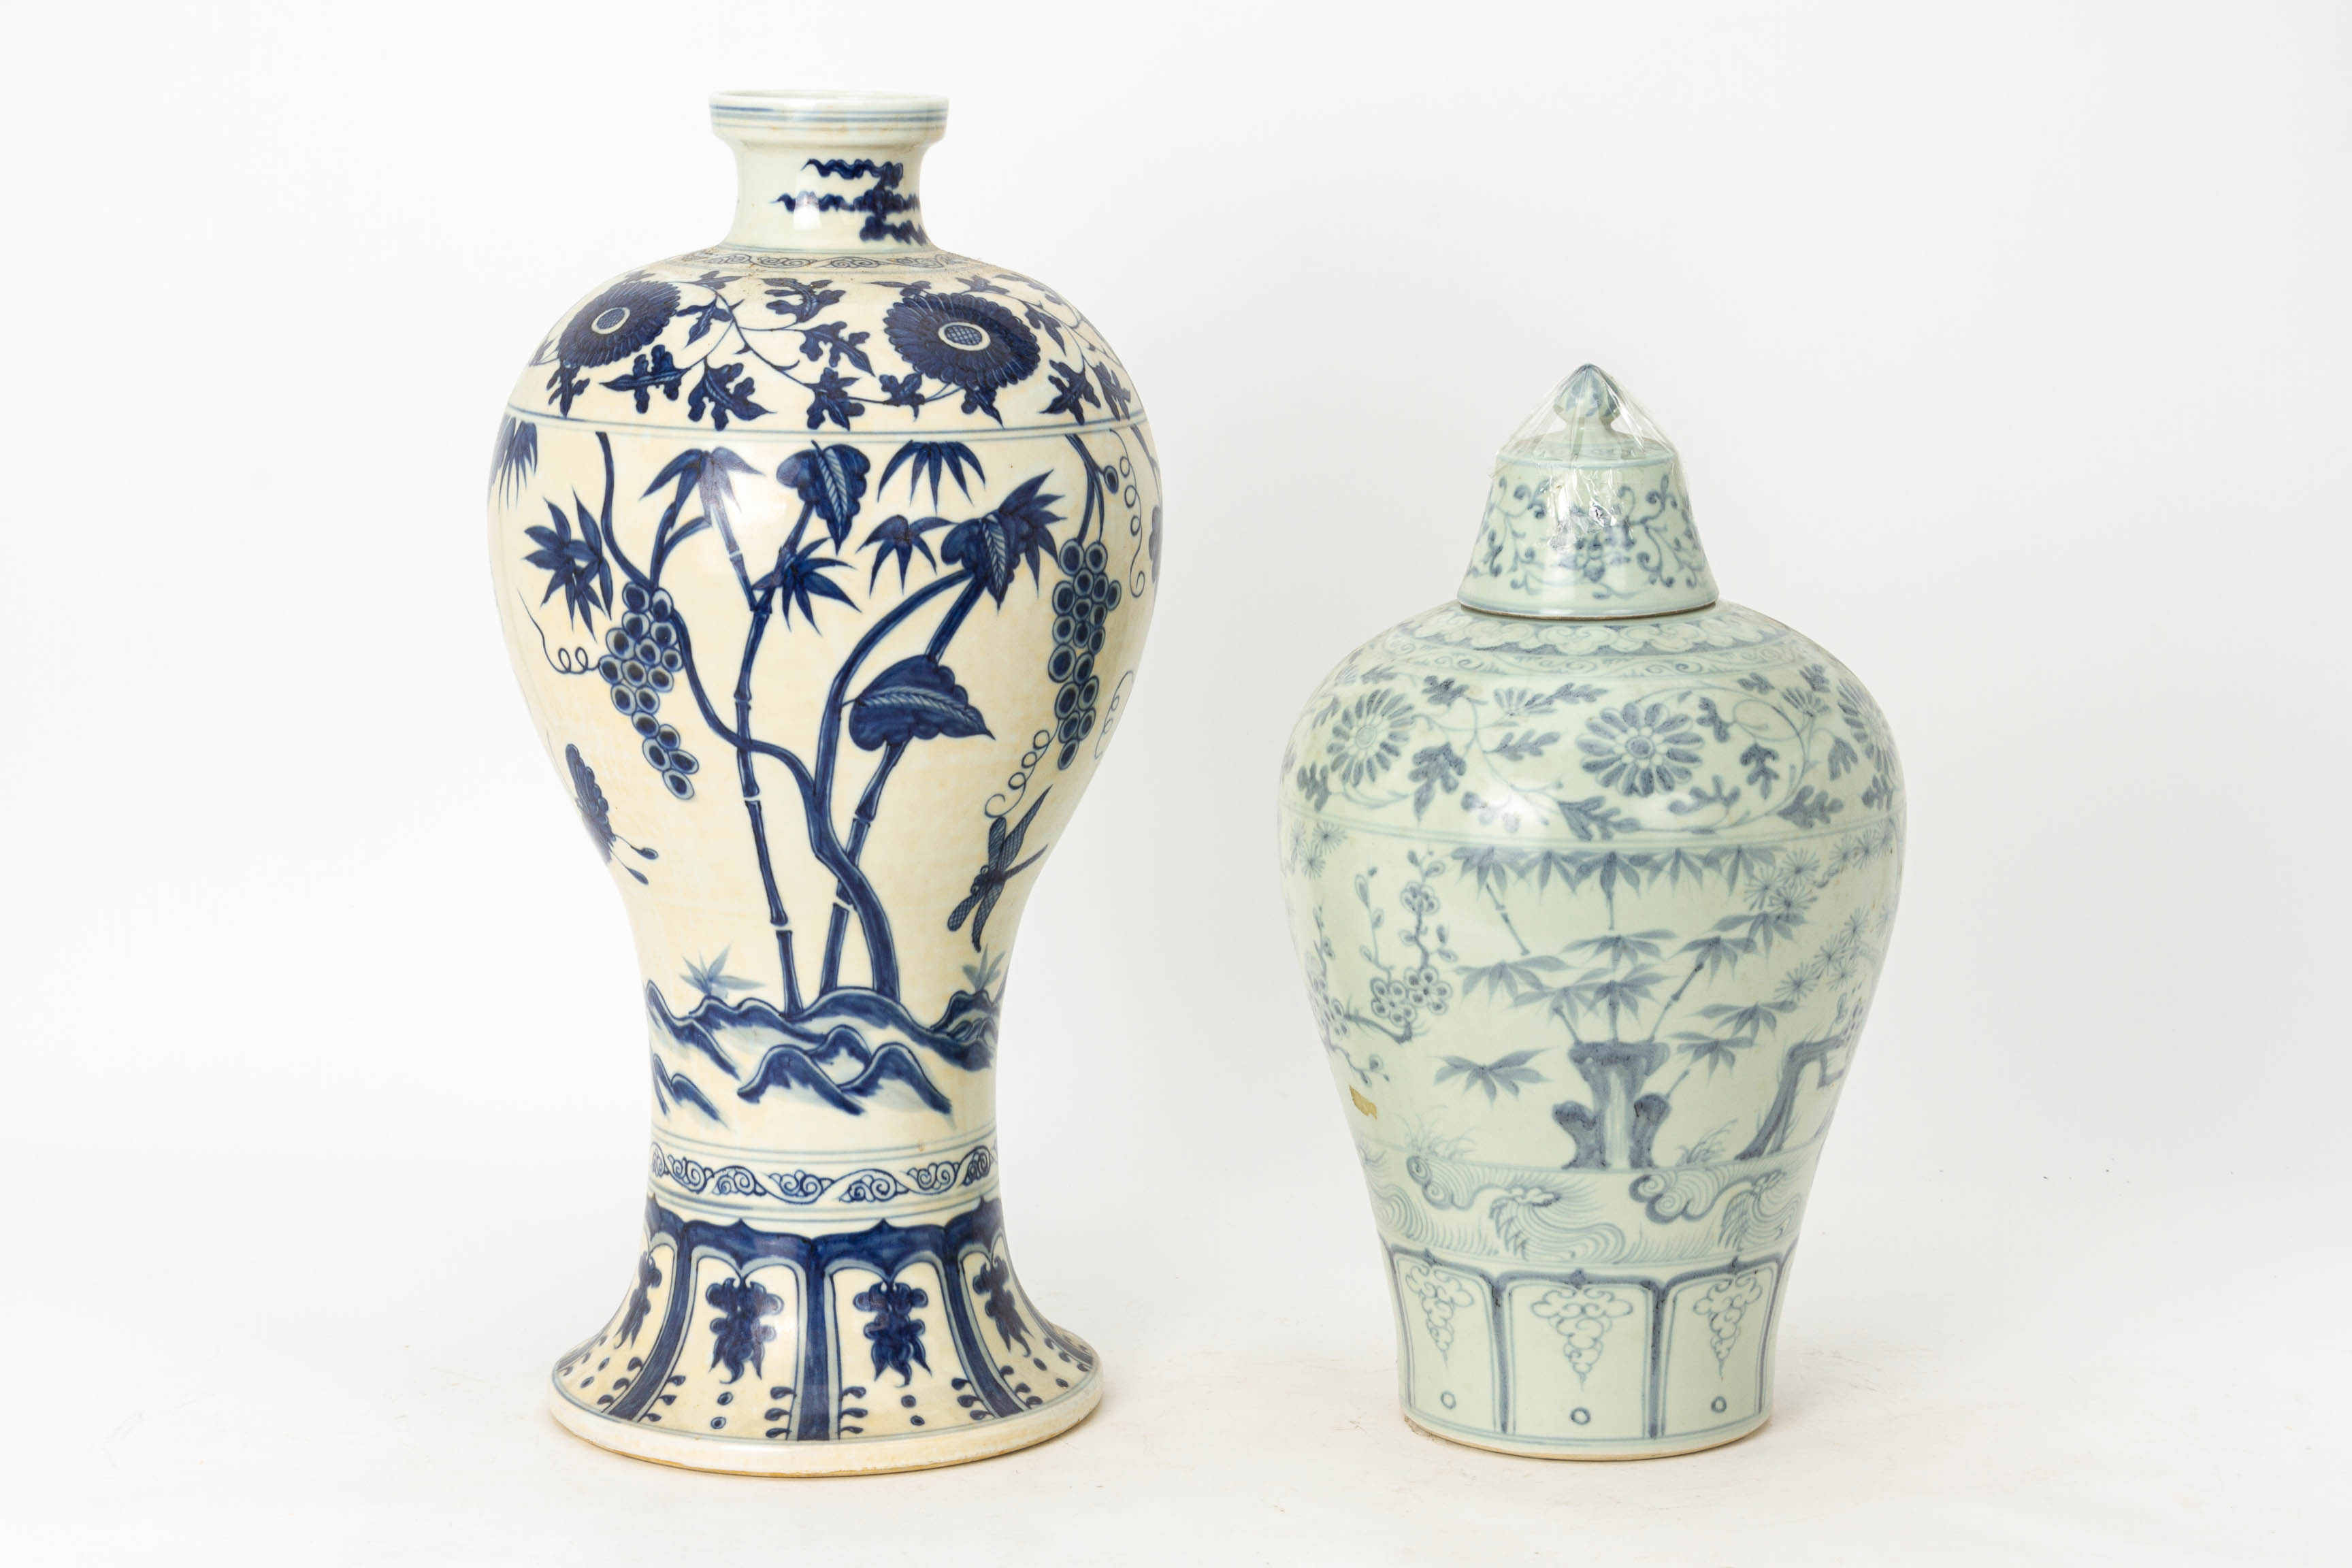 TWO LARGE BLUE AND WHITE PORCELAIN VASES